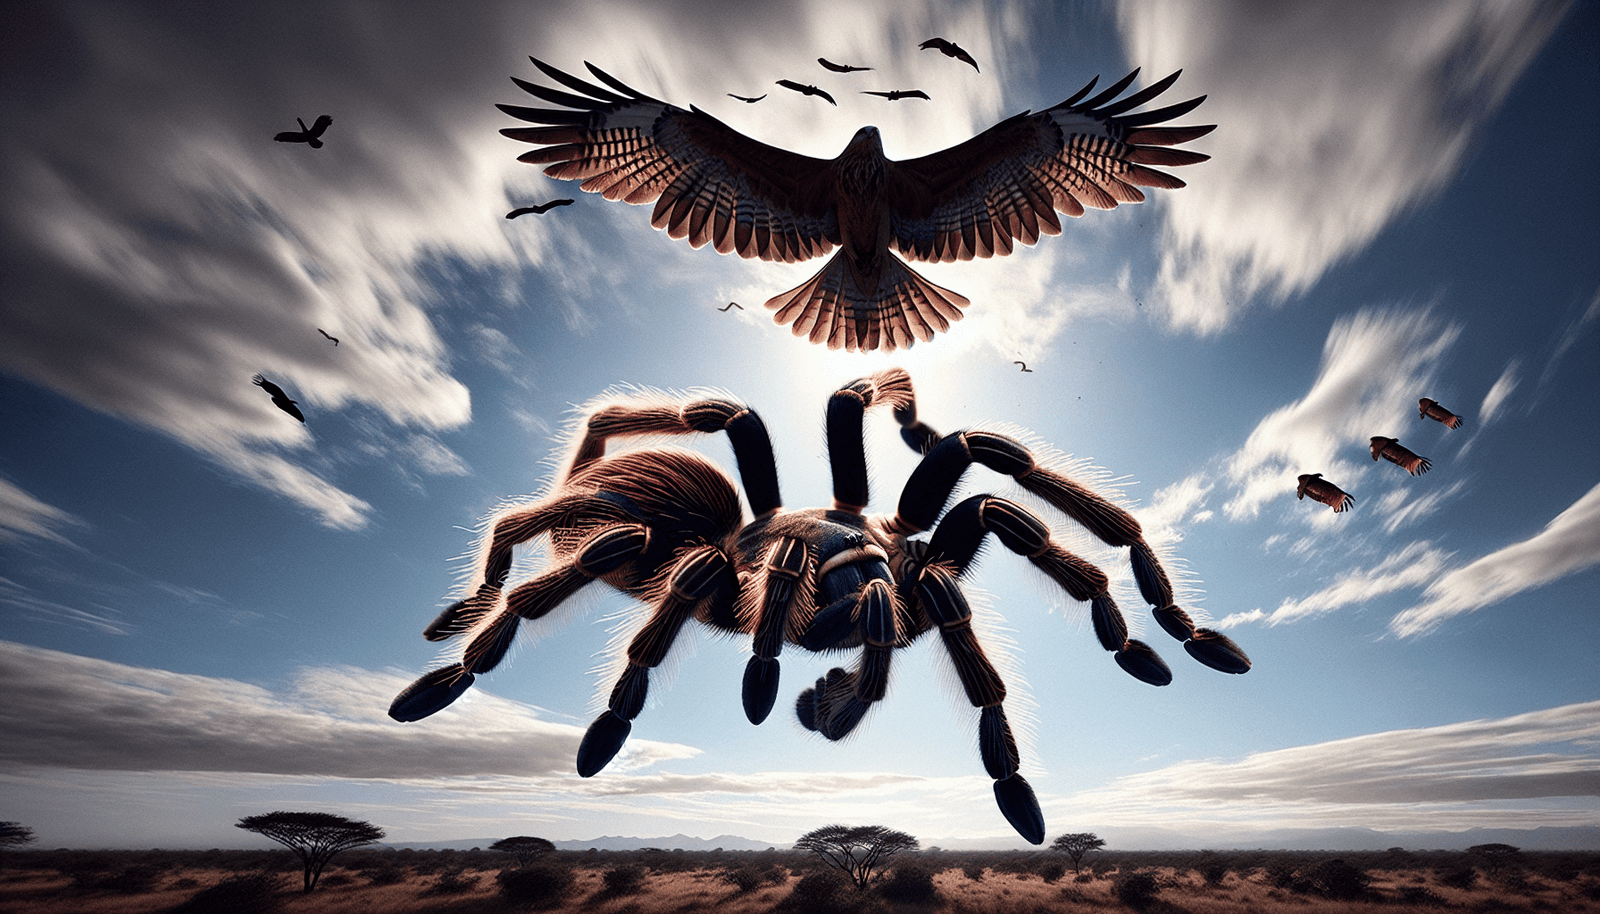 Can Tarantulas Be Threatened By Predatory Avian Species During Certain Life Stages?